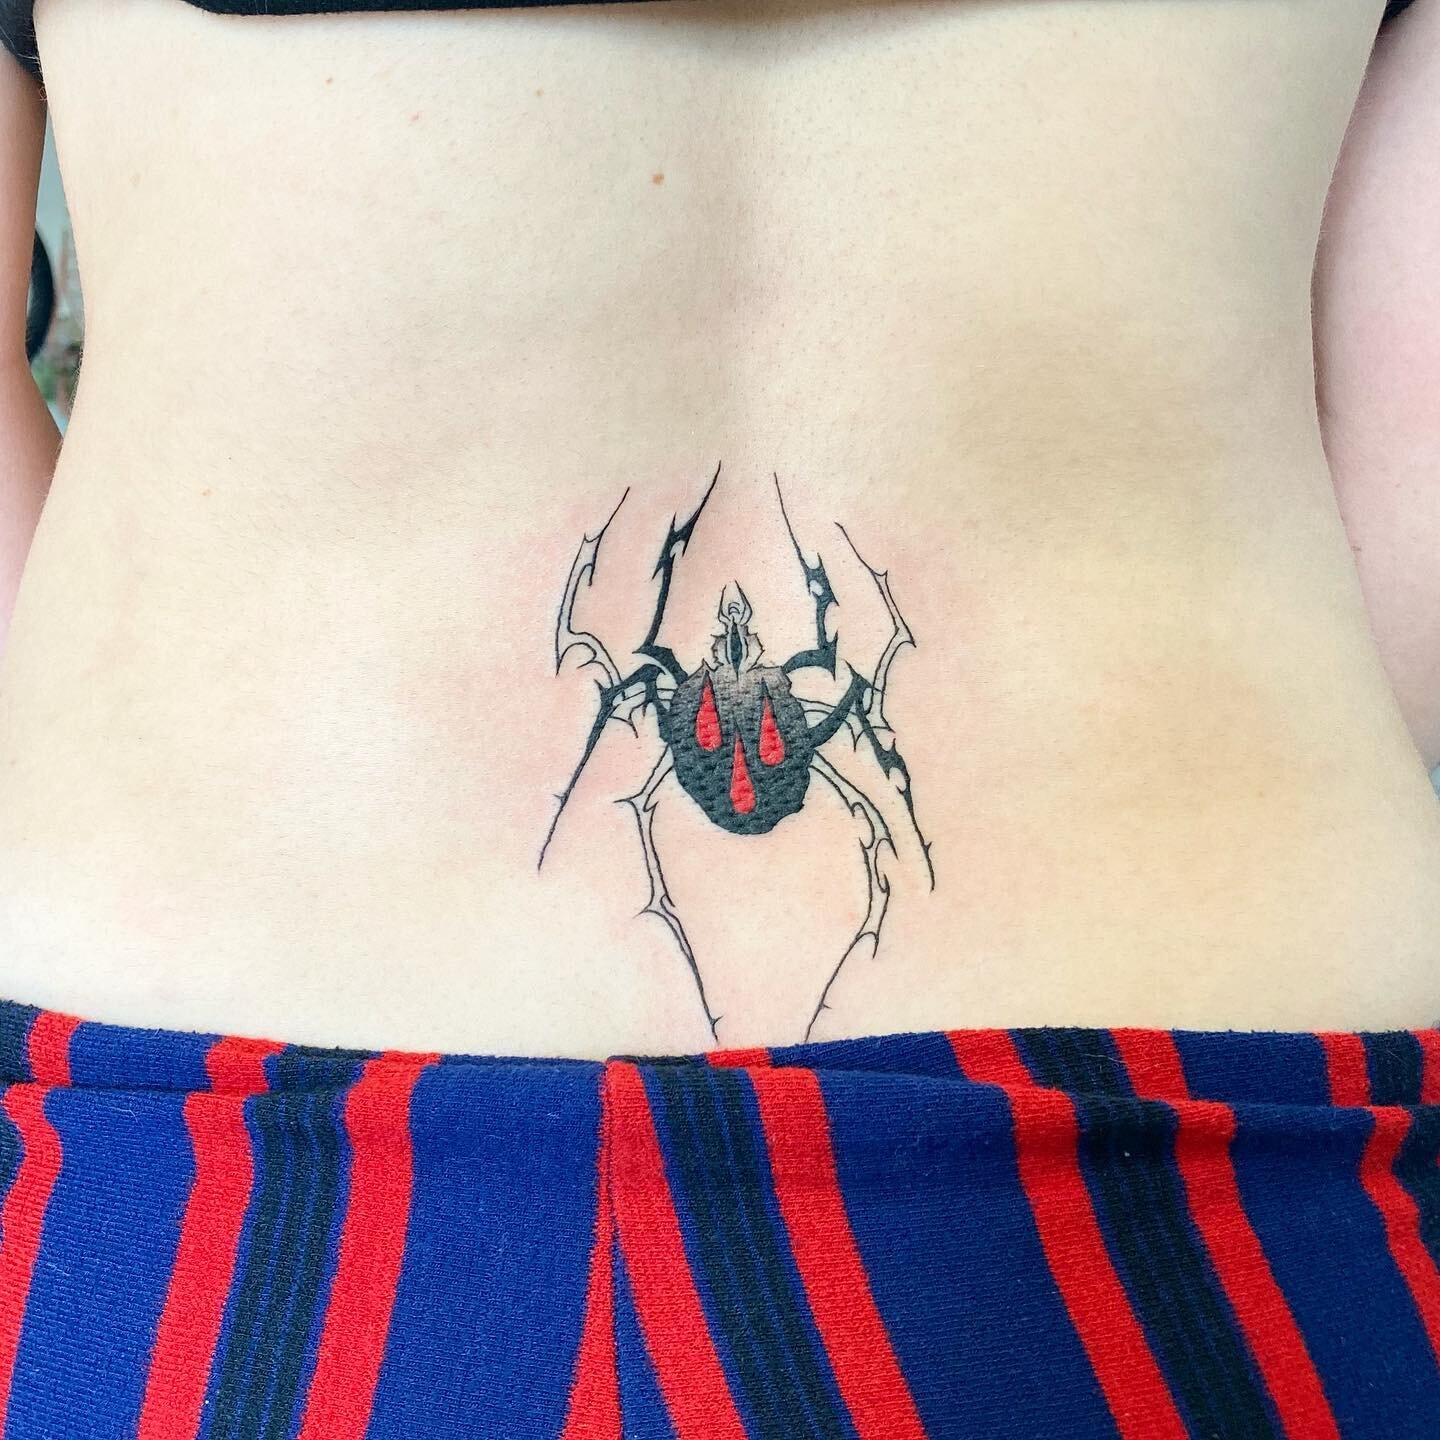 🕷️spider tramp stamp just in time 4 tha warmer weather 🕷️🕷️ i love this sm thank you for bringing me this idea 🕷️🕷️🕷️ BOOKS OPEN LINK IN BIO 2 BOOK